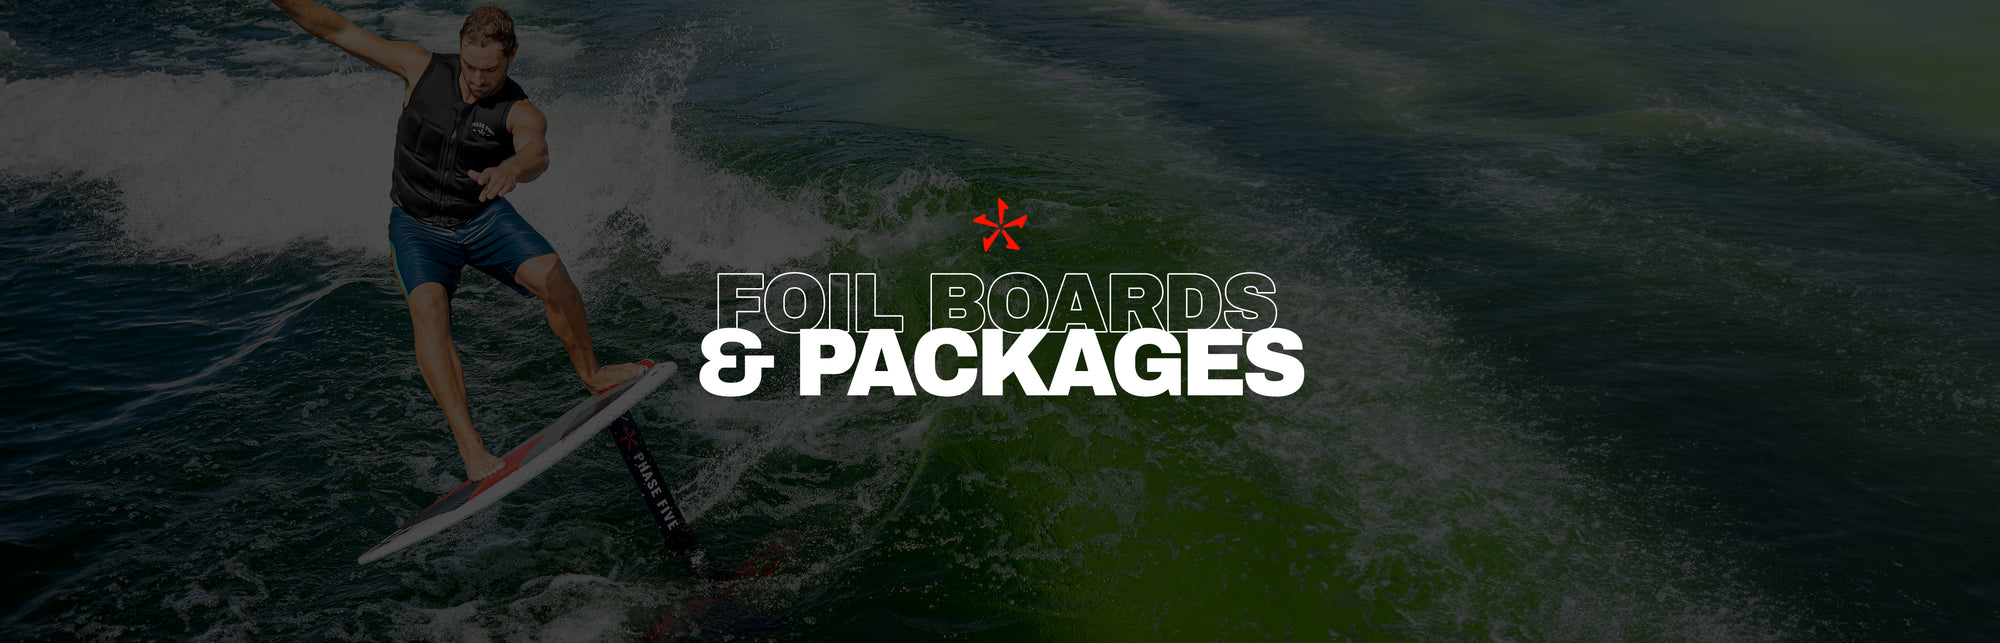 Foilboards + Packages